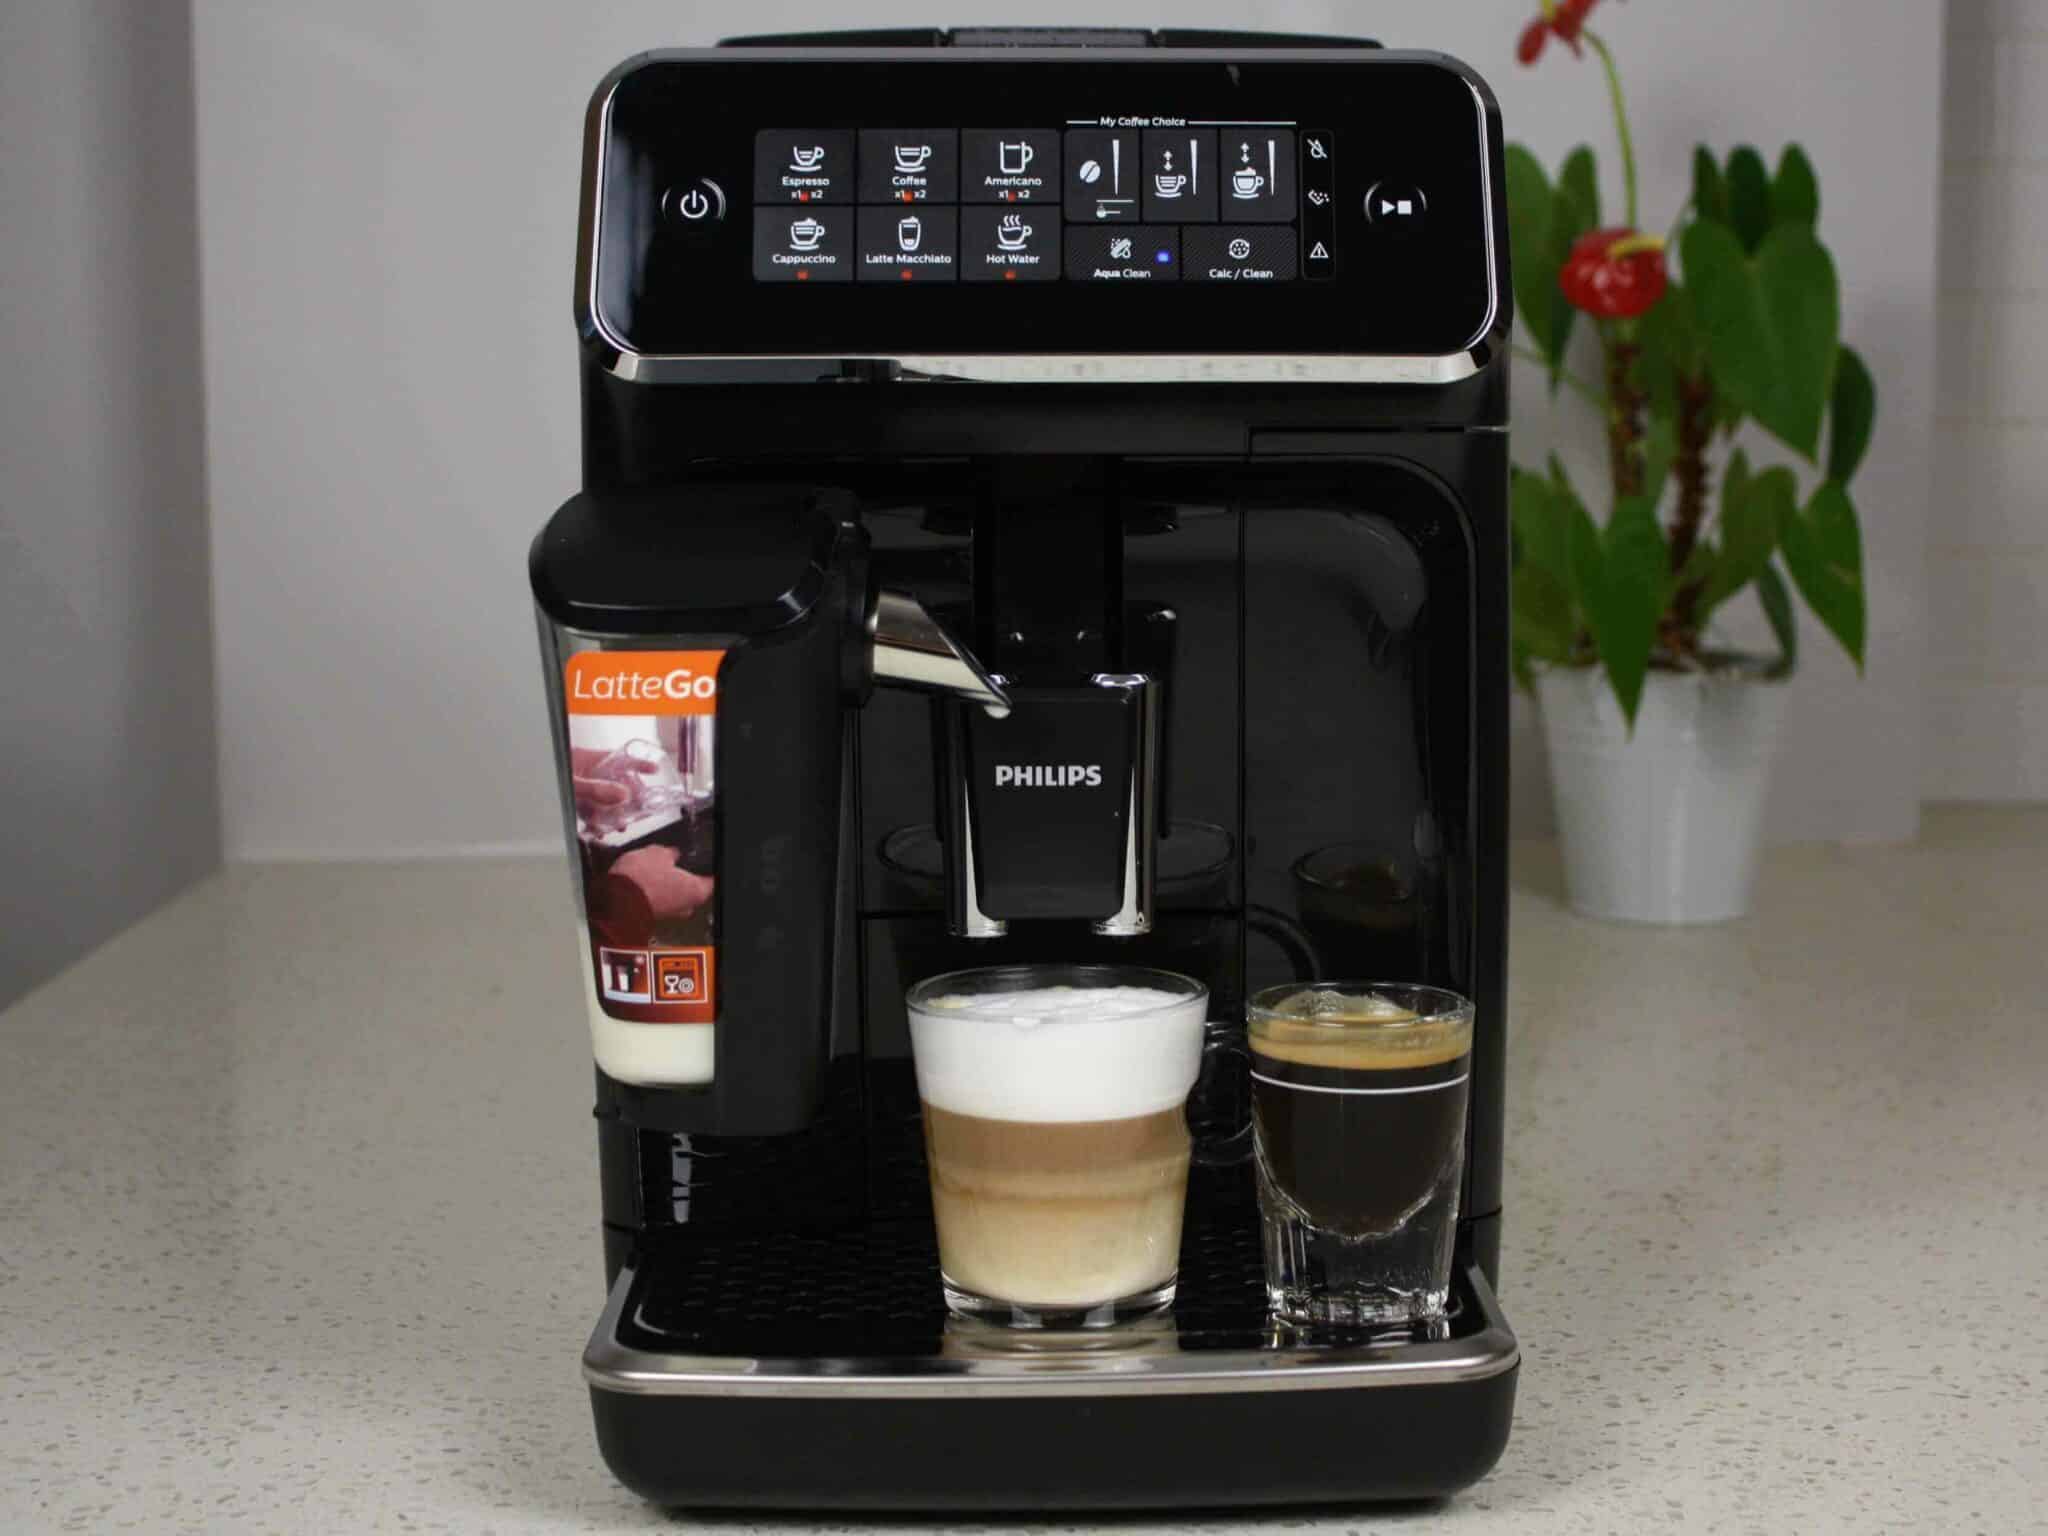 Philips 3200 LatteGo Coffee Drink Quality